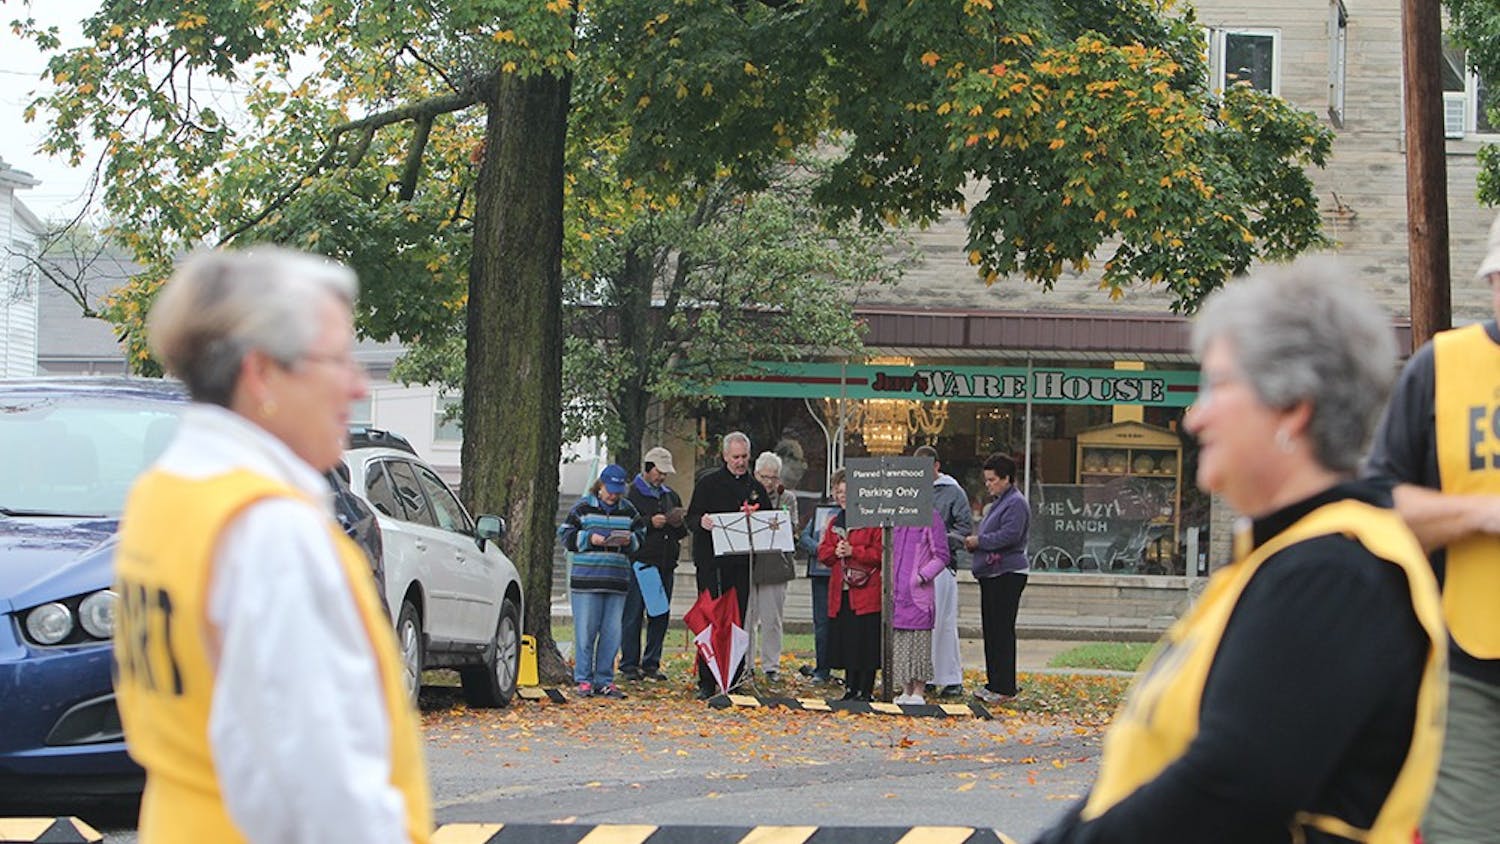 Escorts wait outside Planned Parenthood of Bloomington for women coming into the center for an abortion. Abortions occur on each Thursday and protestors wait outside for every opportunity to talk to the people going into the center.

Protestors pray and sing hymns as escorts wait for patients going into Planned Parenthood of Bloomington on one of the mornings abortions occur. 